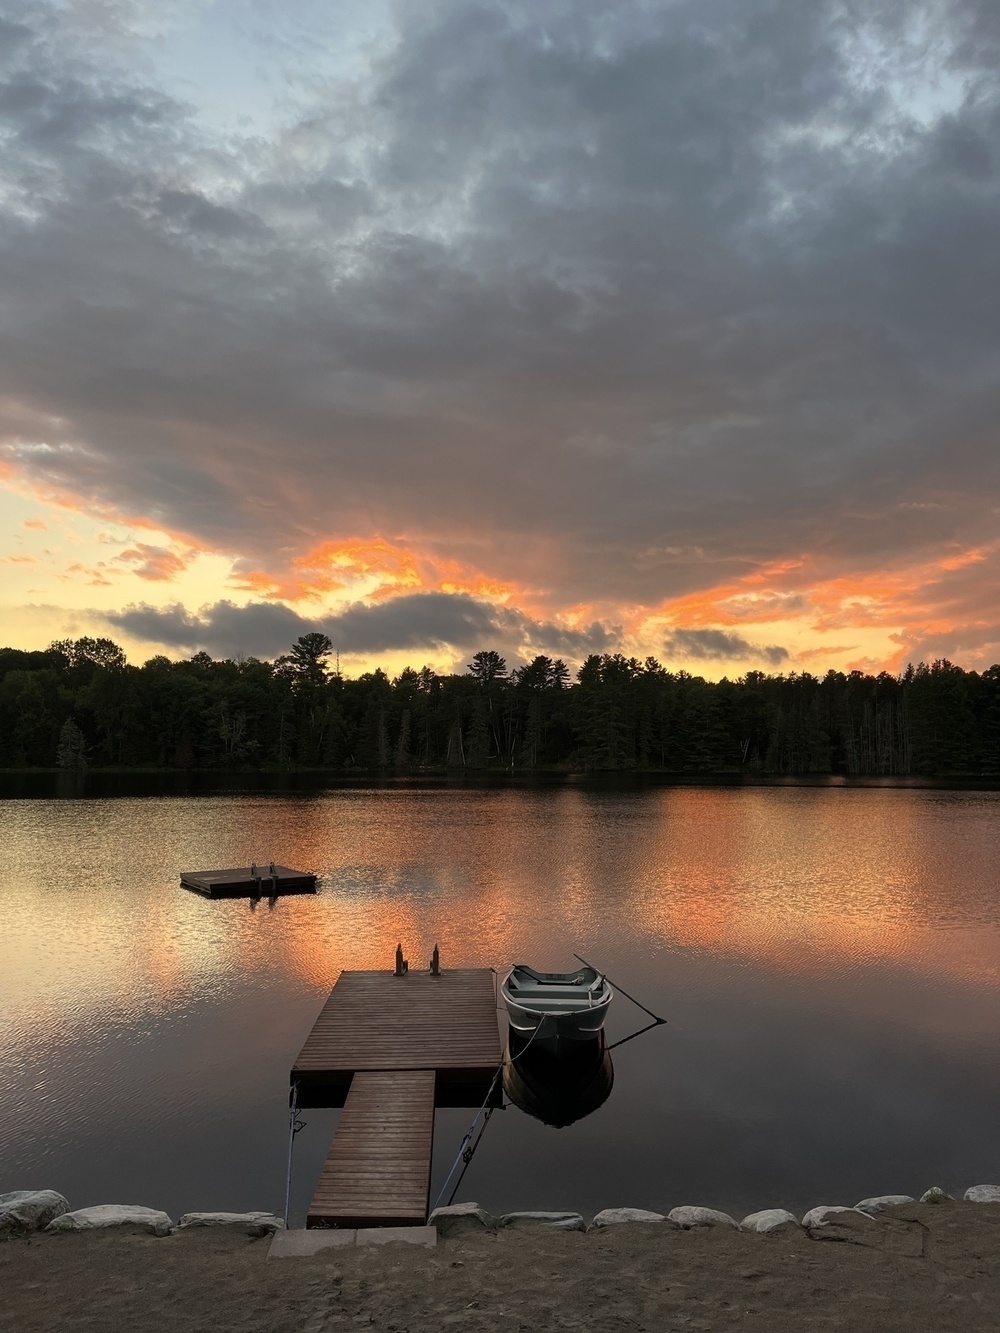 Sunset over a lake with rowboat in the foreground 